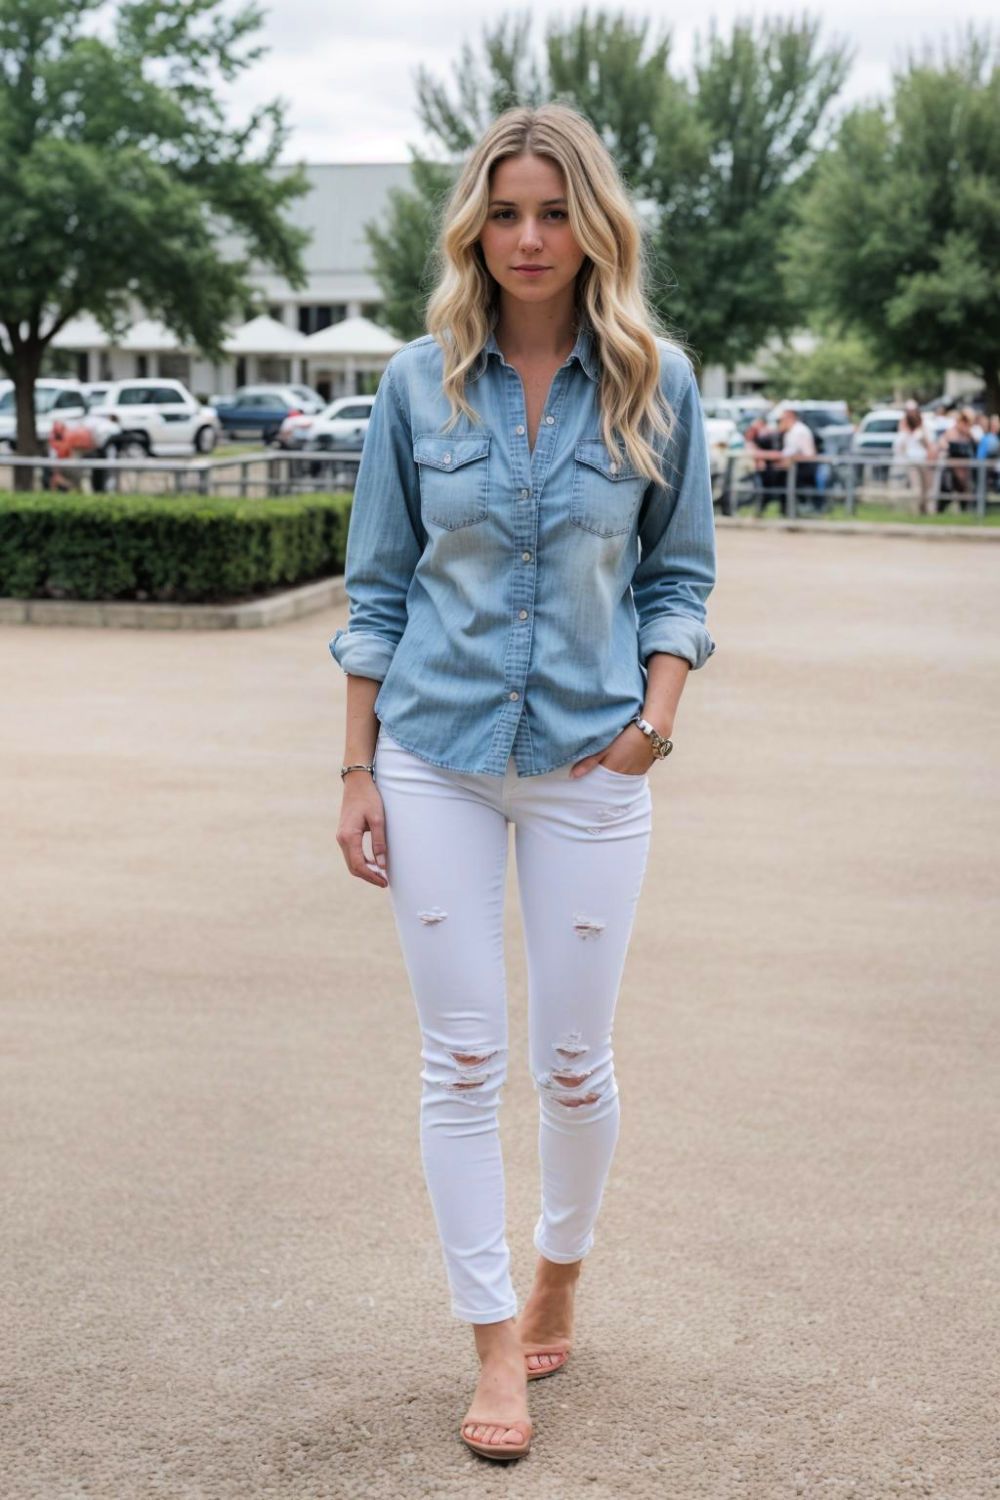 chambray shirt and white jeans country concert fashion